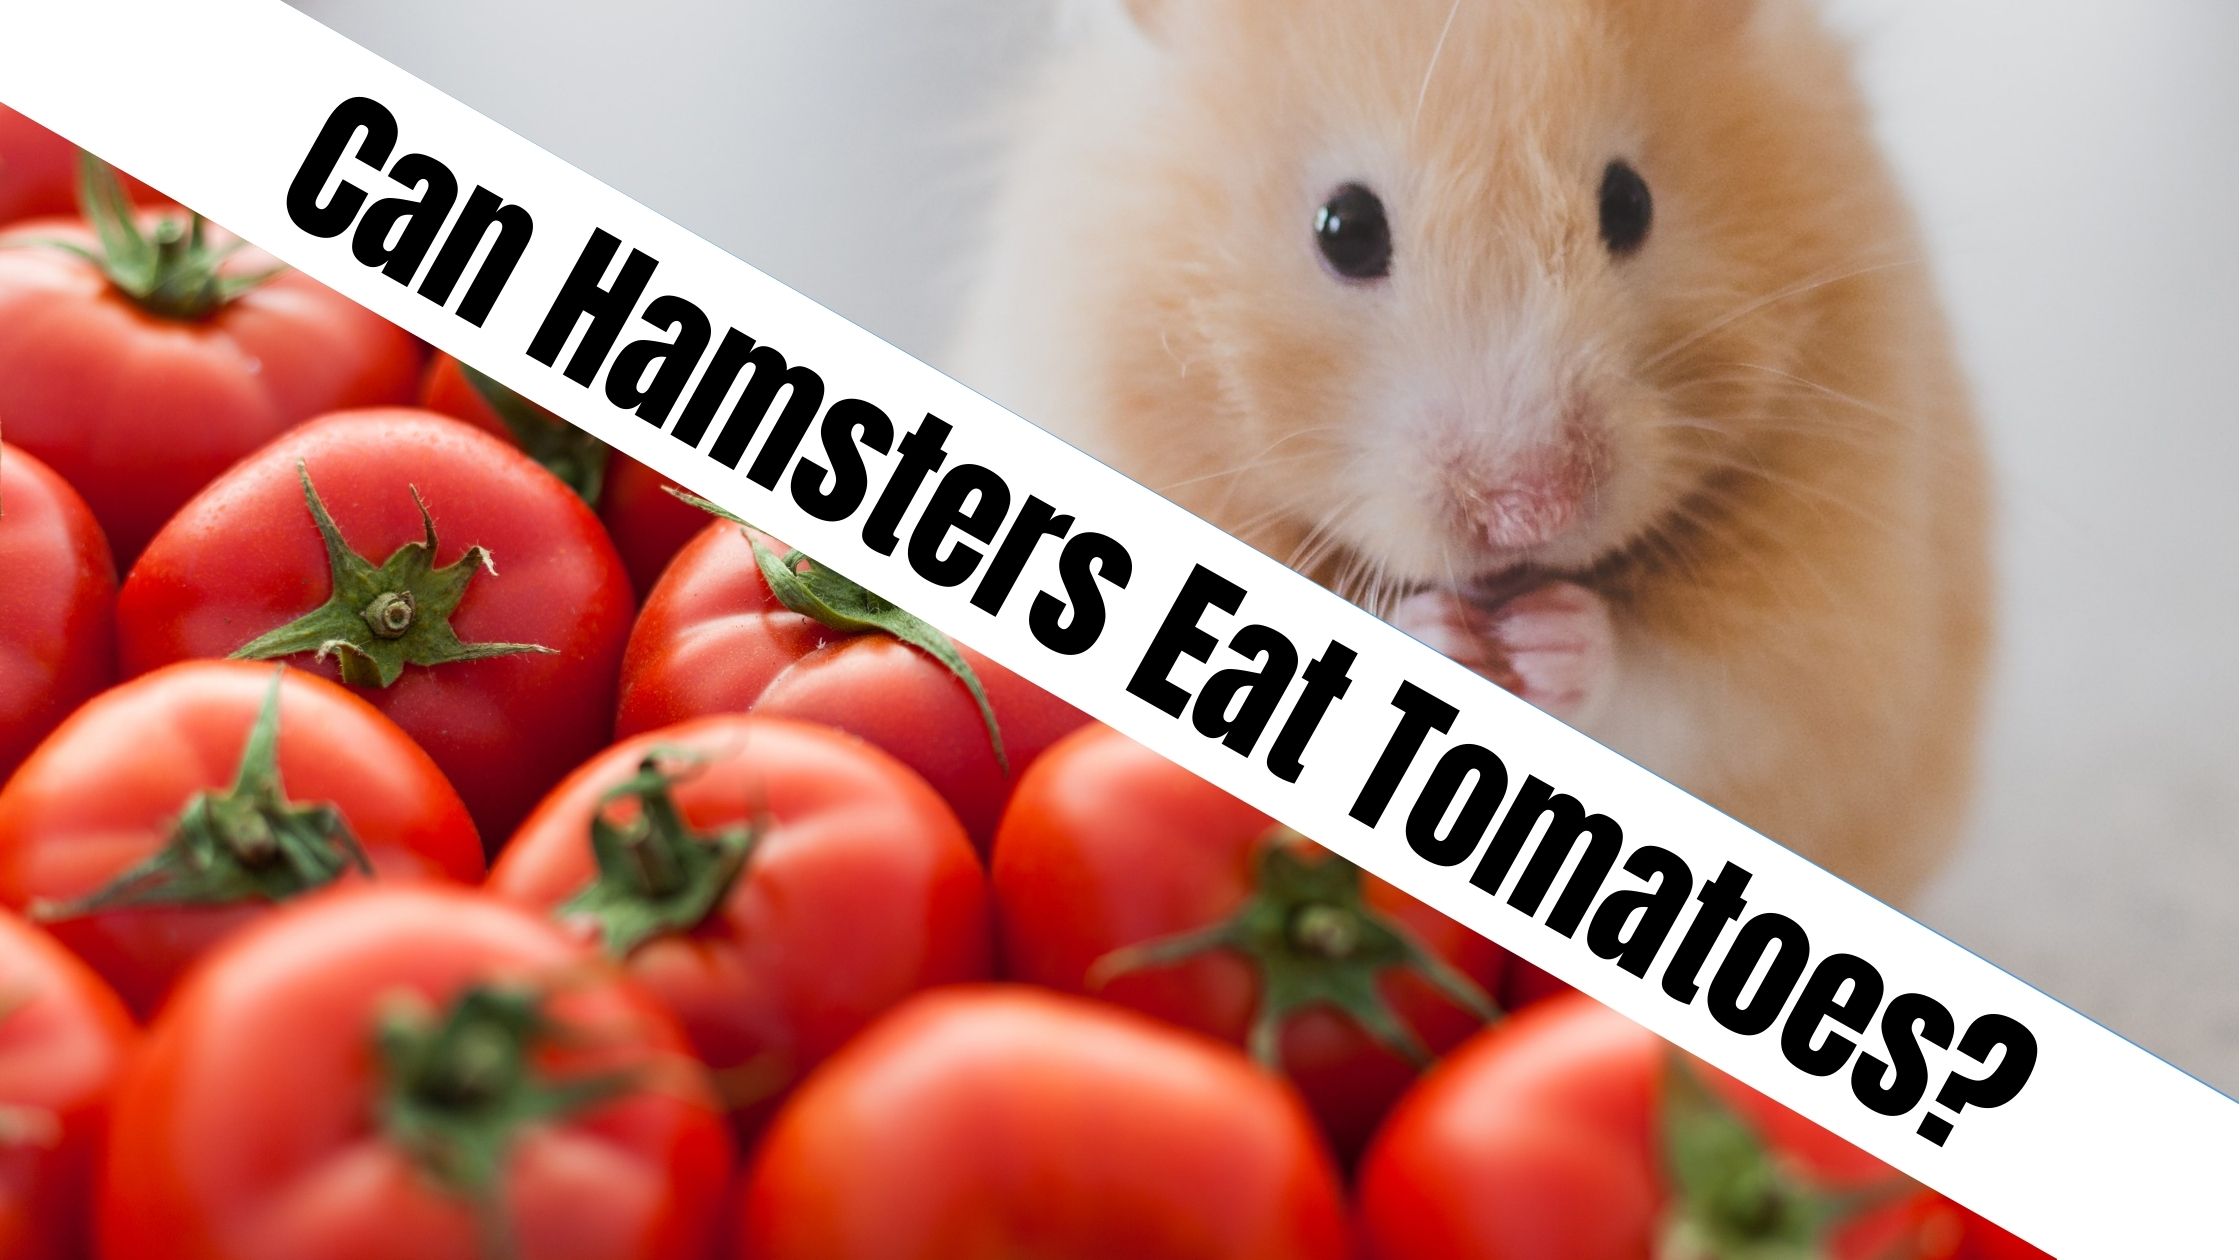 Can Hamsters Eat Tomatoes?